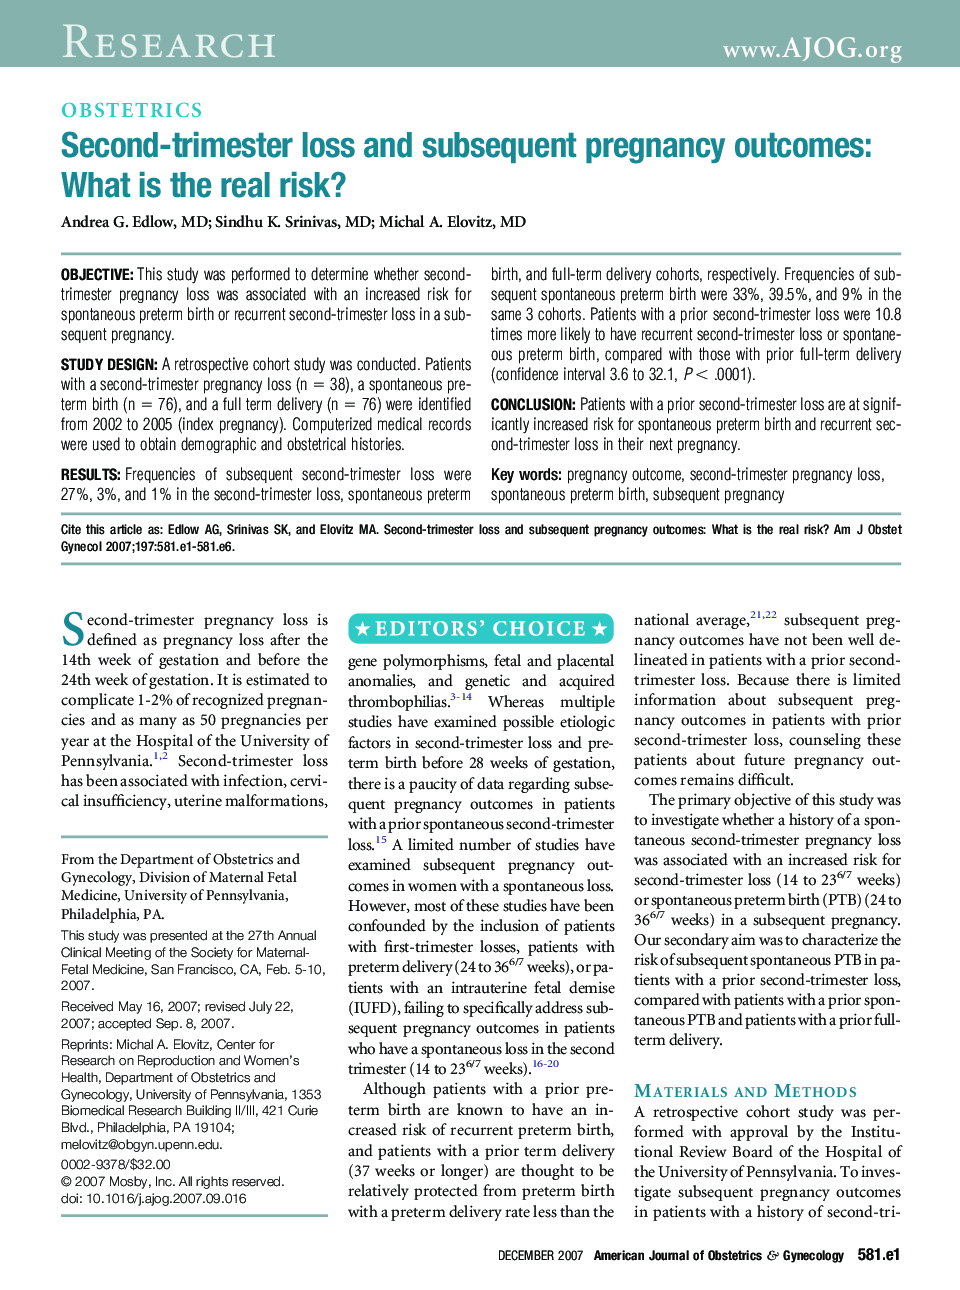 Second-trimester loss and subsequent pregnancy outcomes: What is the real risk?